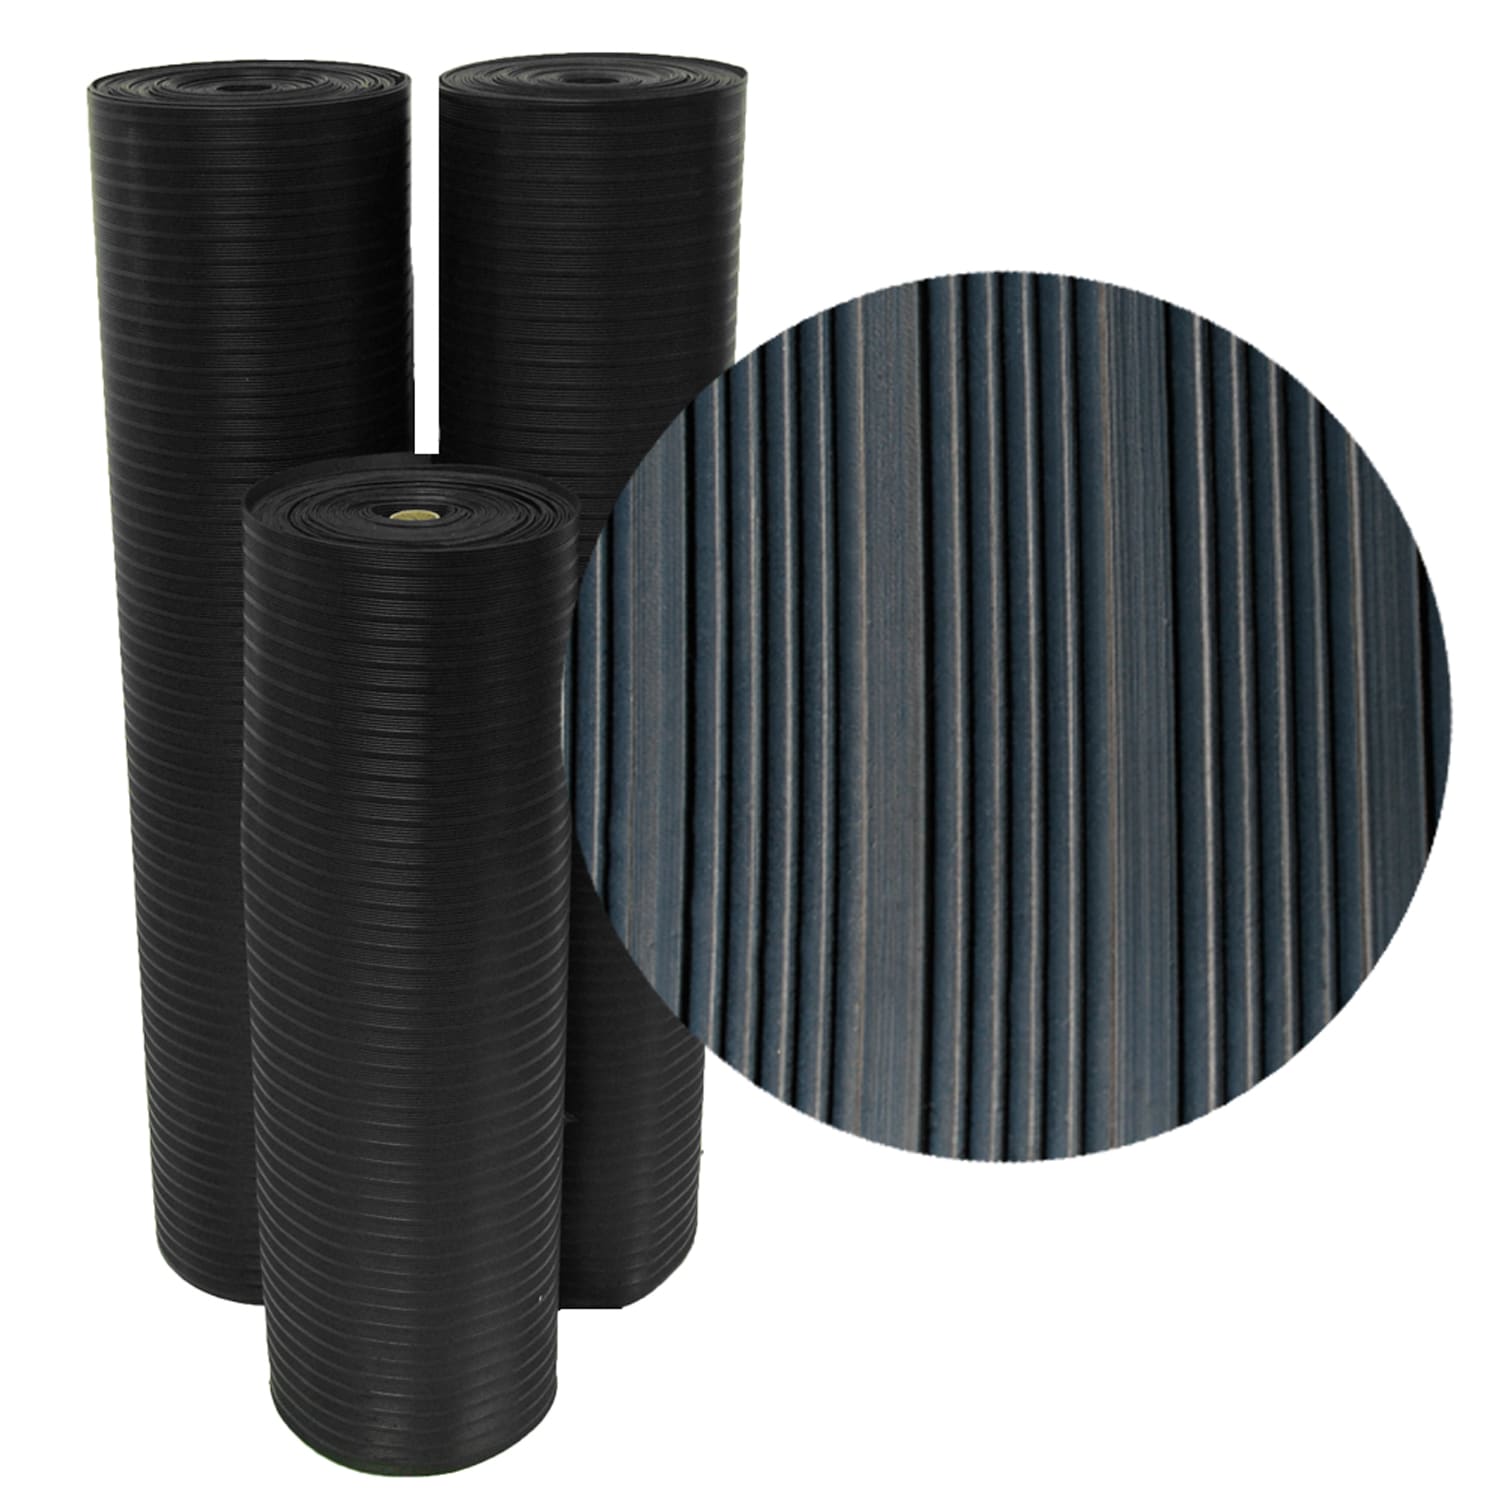 Vinyl runner floor mats, rolls for floor protection, corrugated and diamond  mat rolls for wood and gymnasium floors, warehouse and industrial flooring.